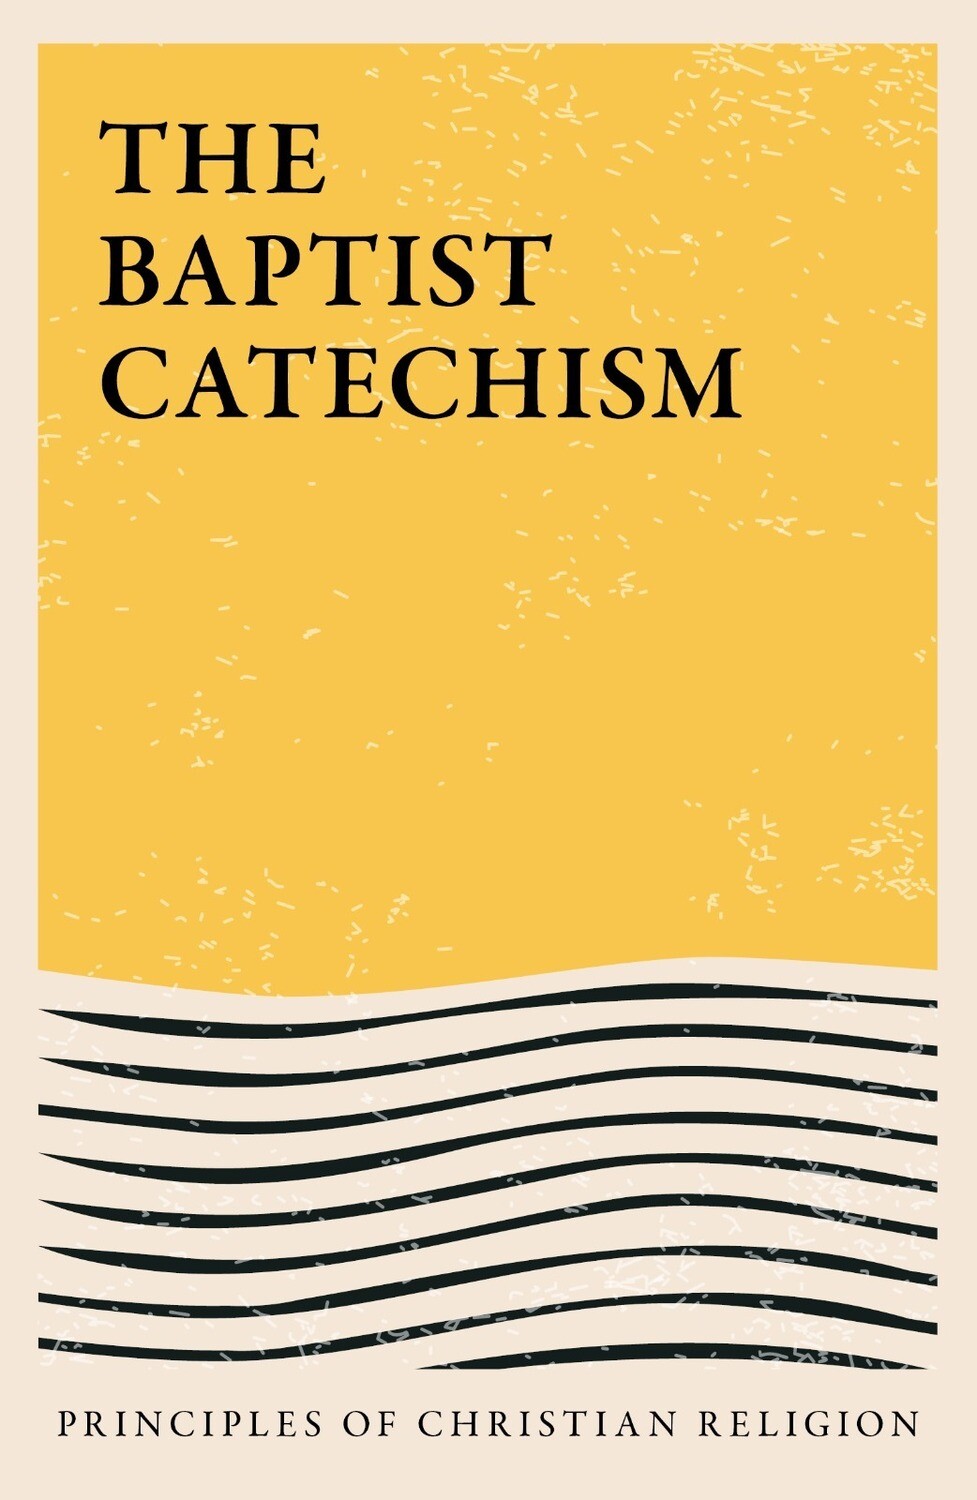 The Baptist Catechism